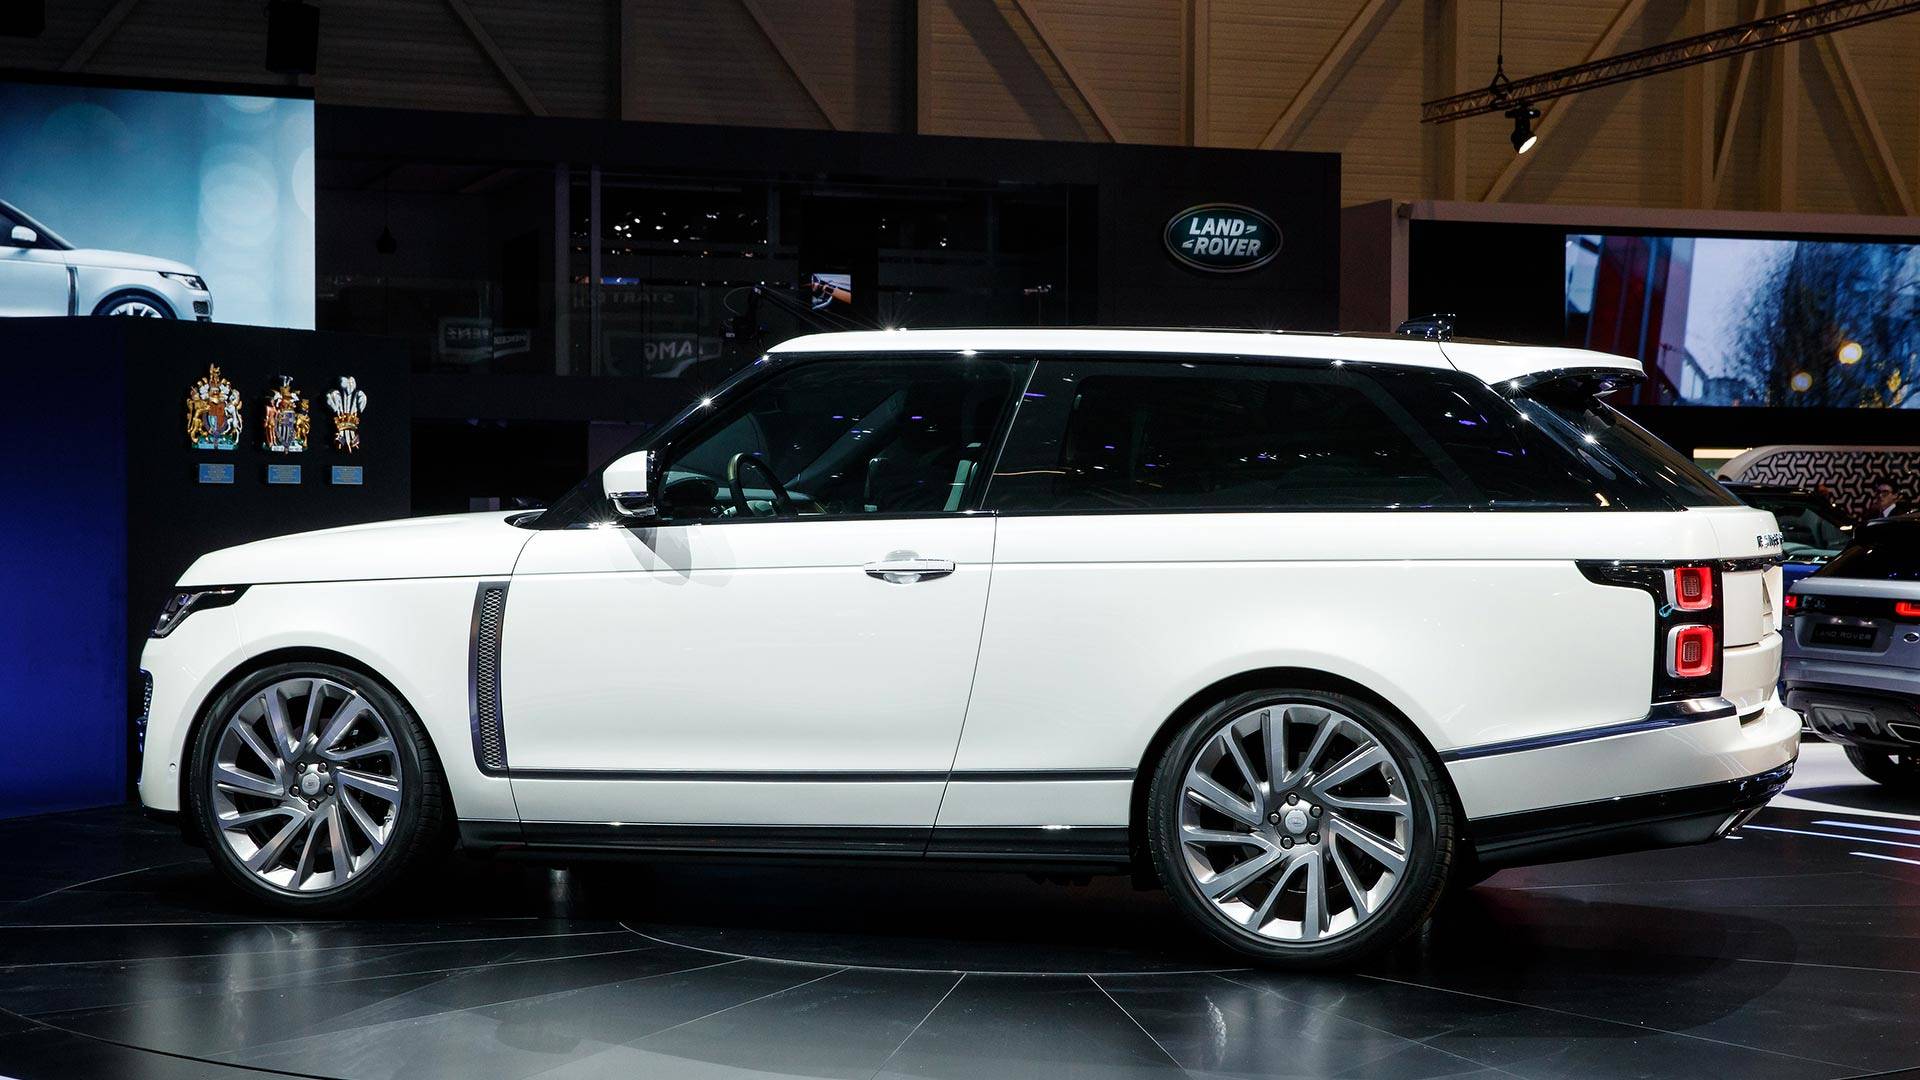 2019 Range Rover Sv Coupe - Range Rover Sv Coupe , HD Wallpaper & Backgrounds